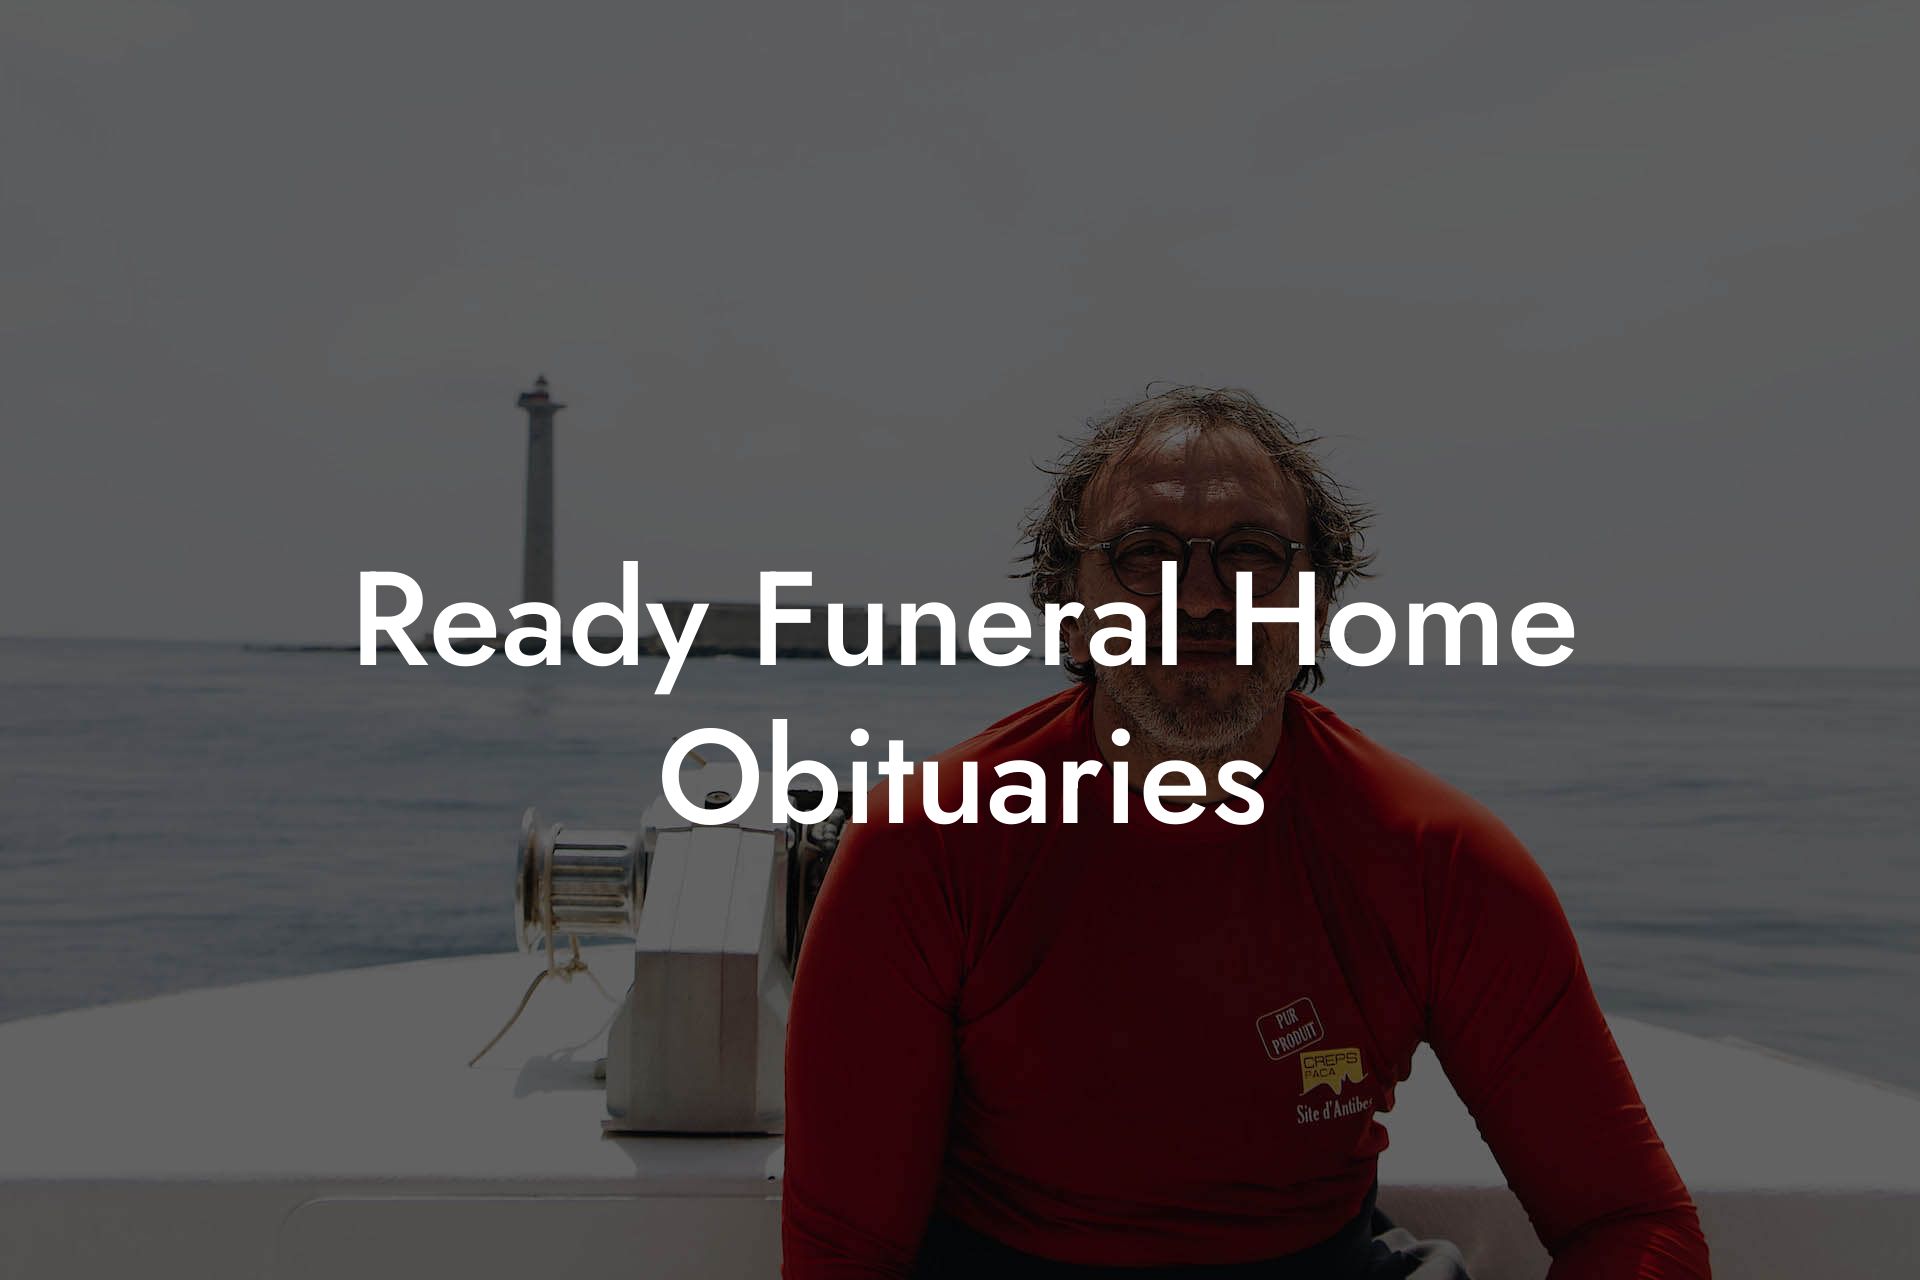 Ready Funeral Home Obituaries